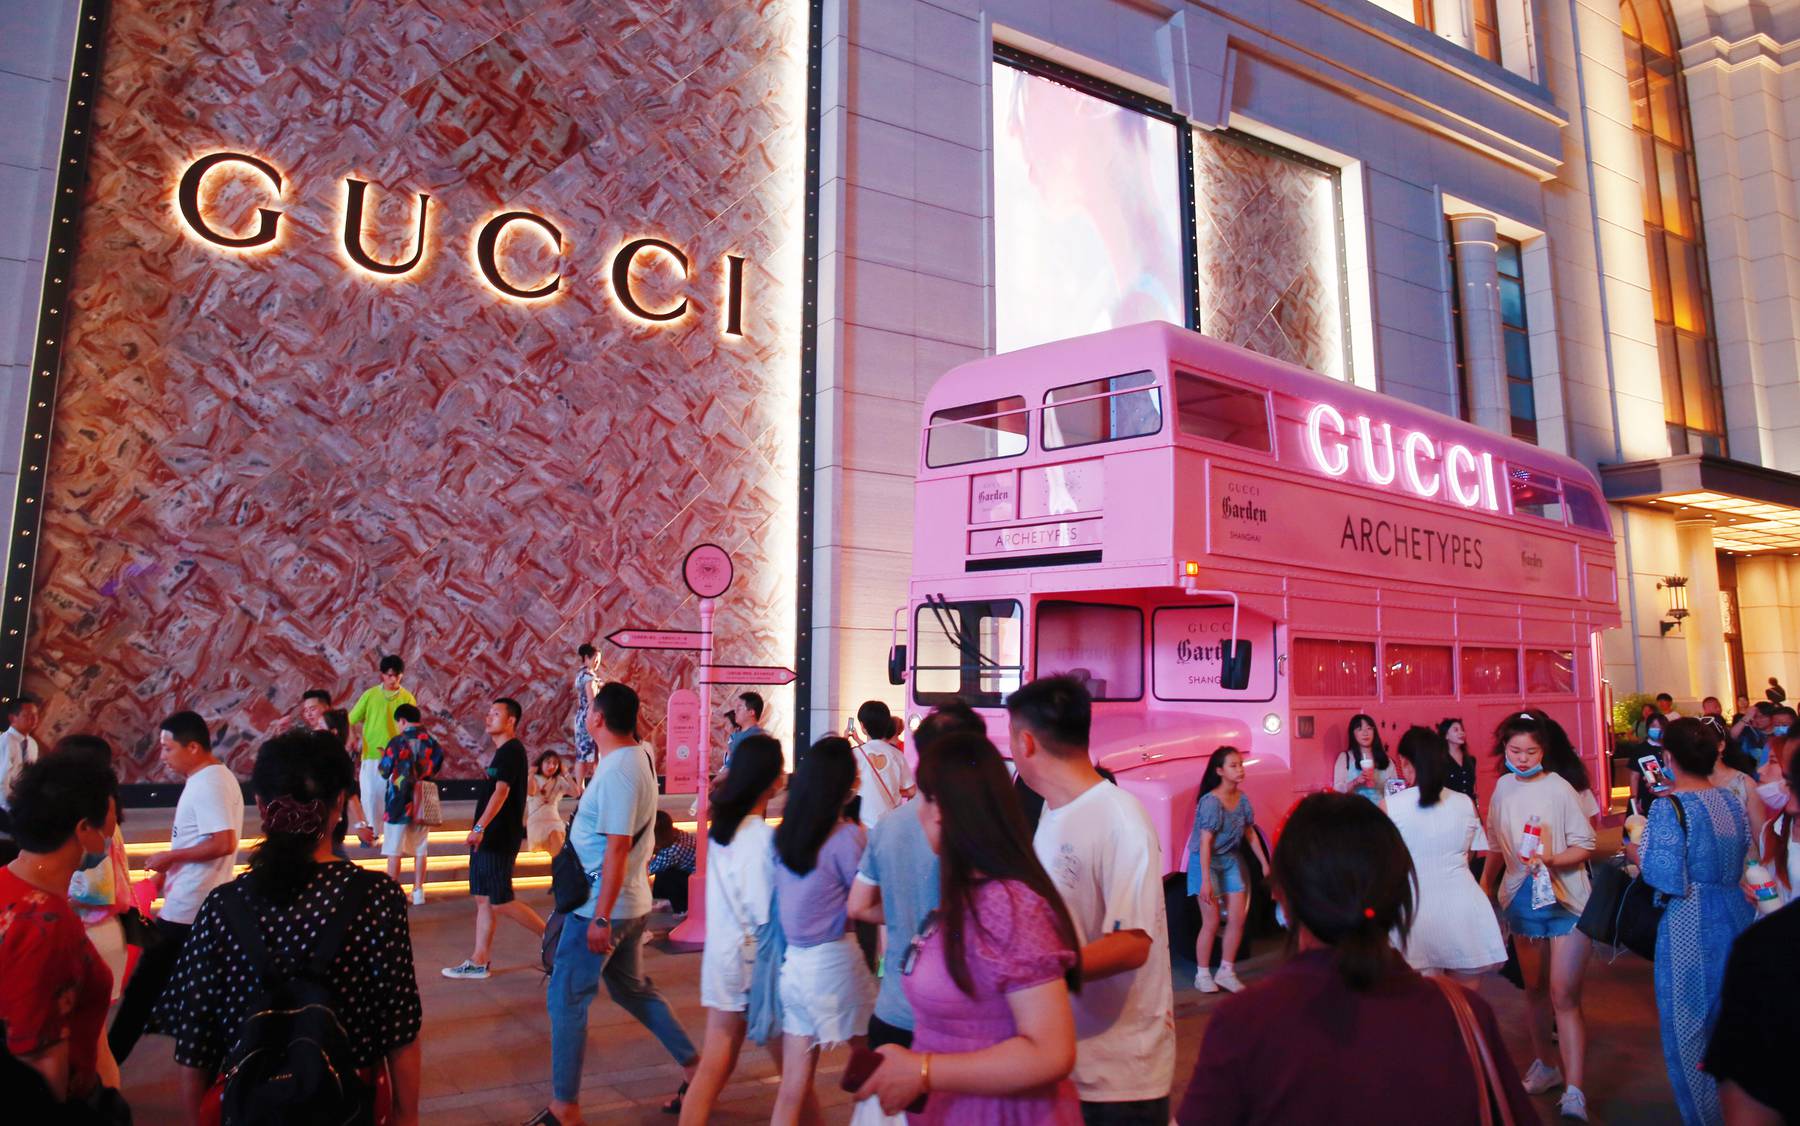 A retro bus was part of a Gucci activation in Shanghai, China in July 2021. Events to promote the brand's latest collection are  now on hold due to coronavirus restrictions in cities including Shanghai.